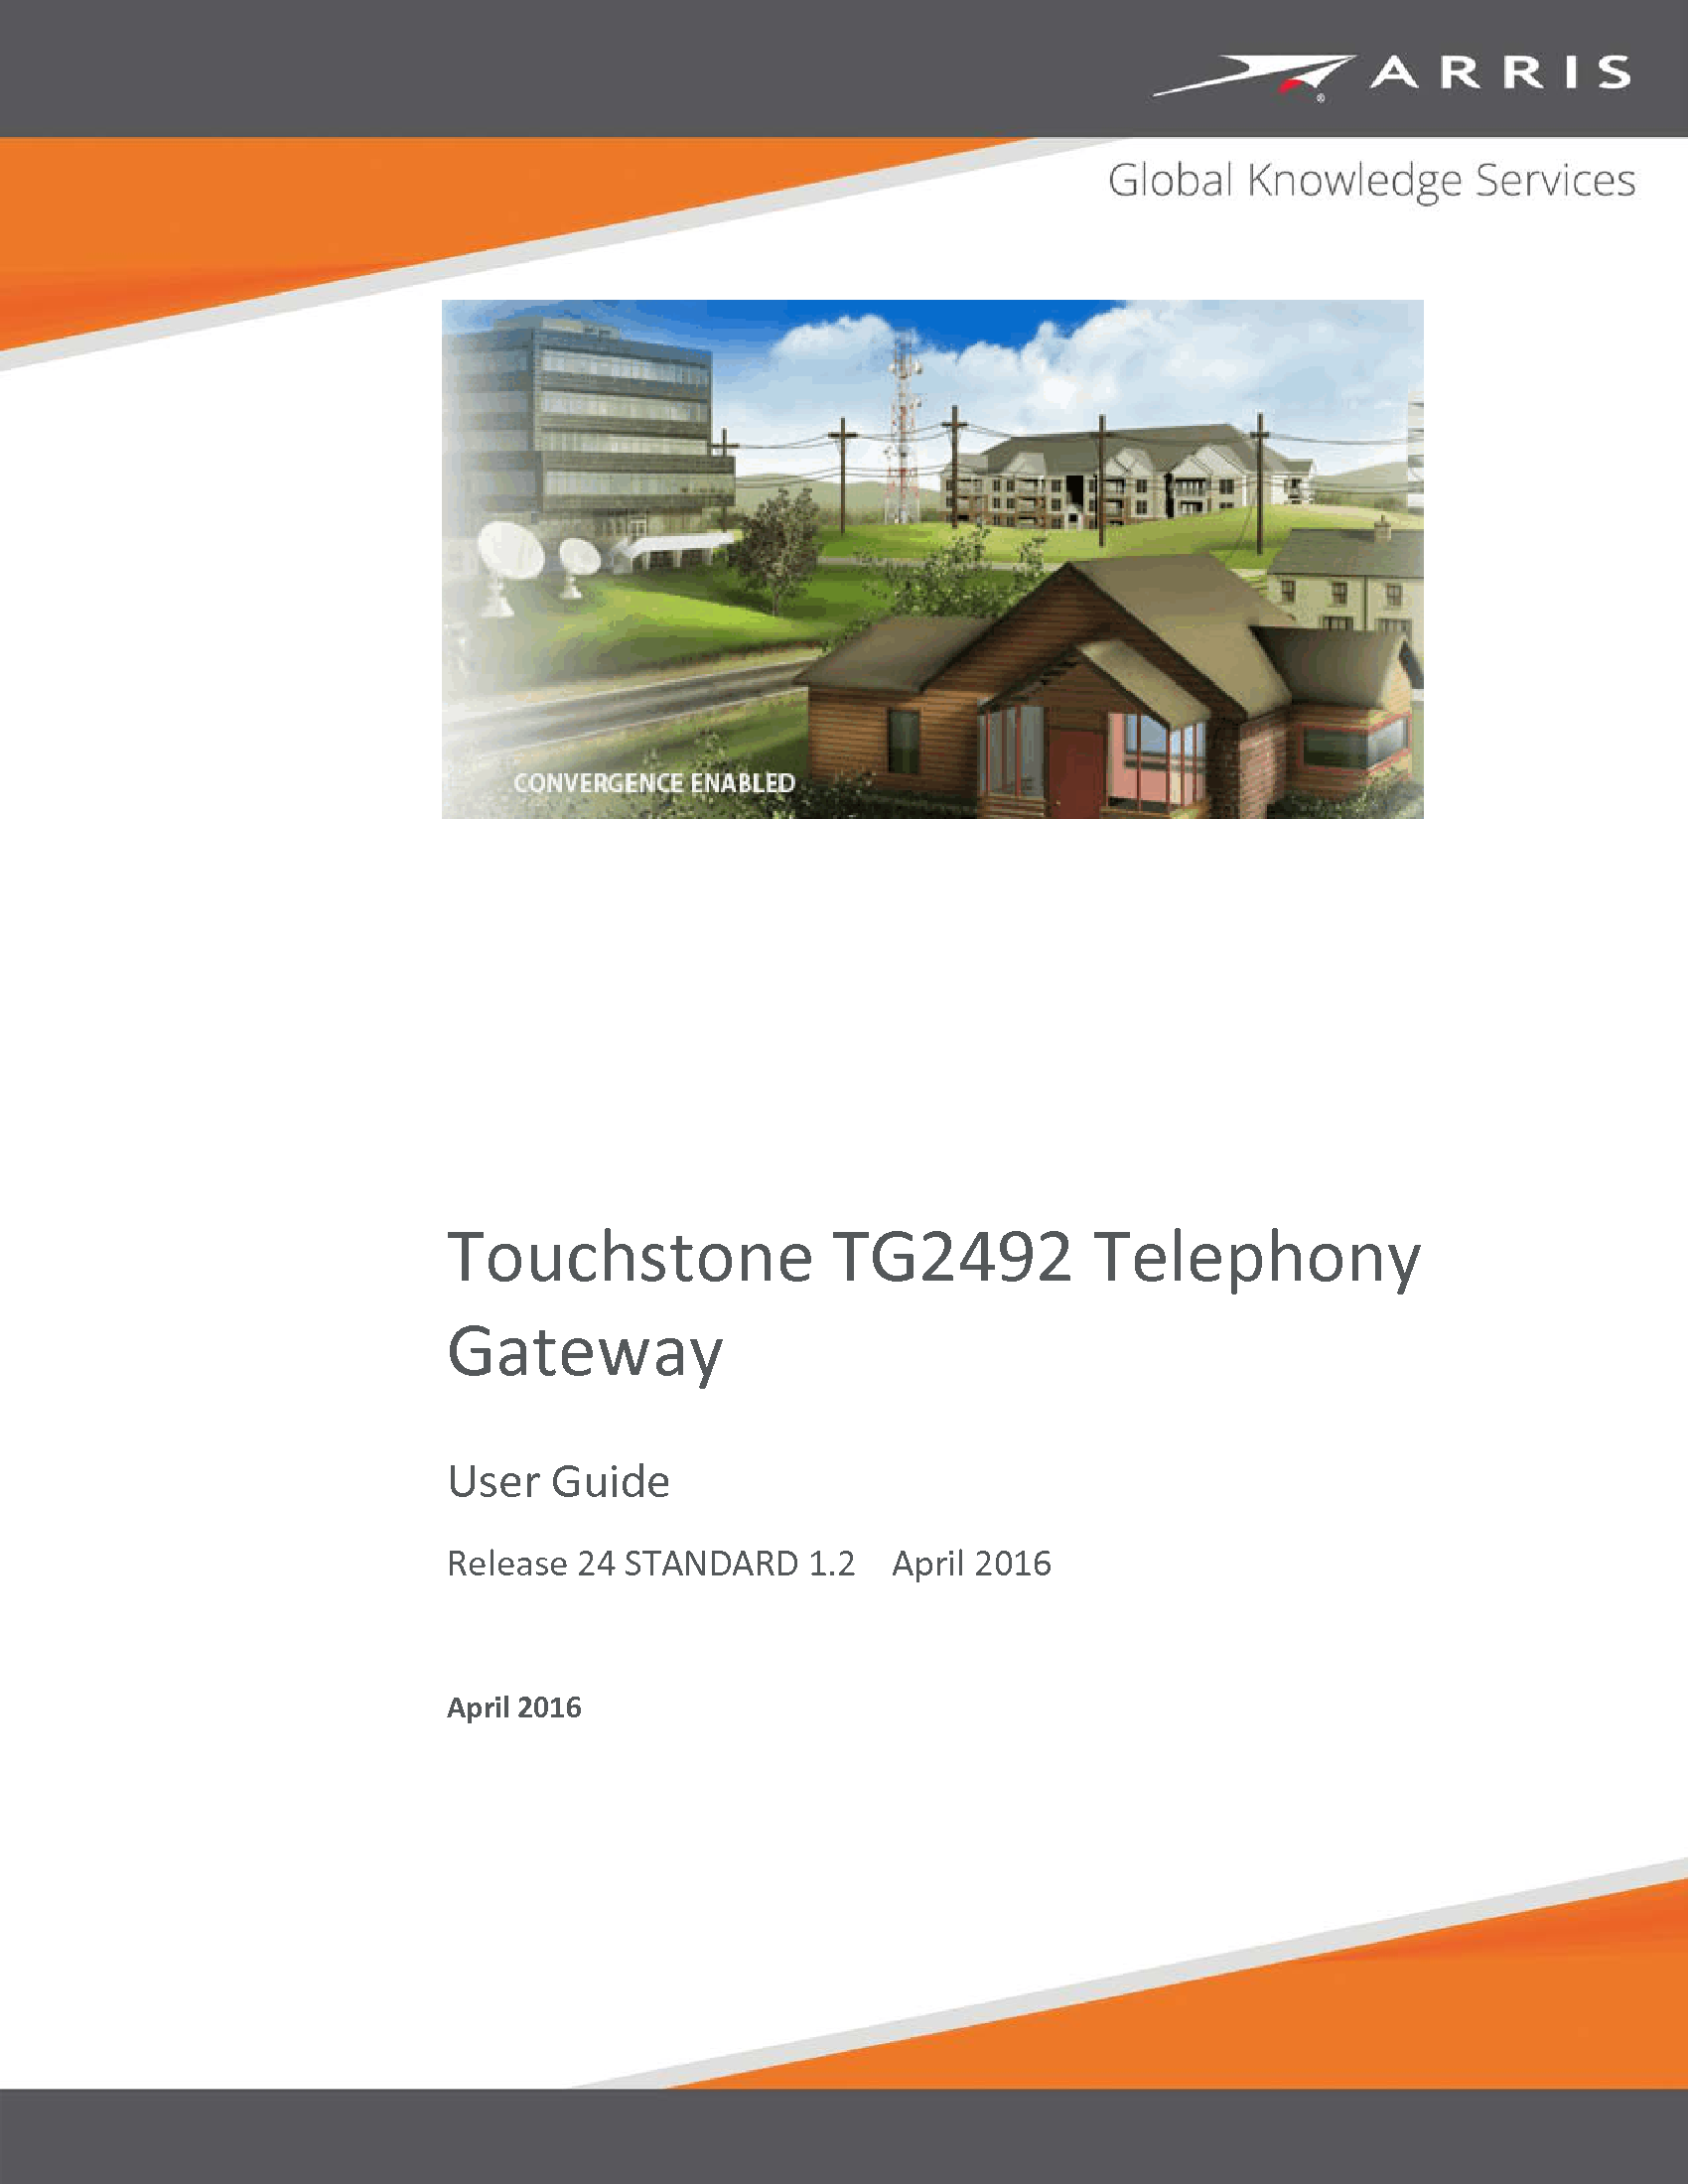   Touchstone TG2492 Telephony Gateway User Guide Release 24 STANDARD 1.2    April 2016  April 2016  